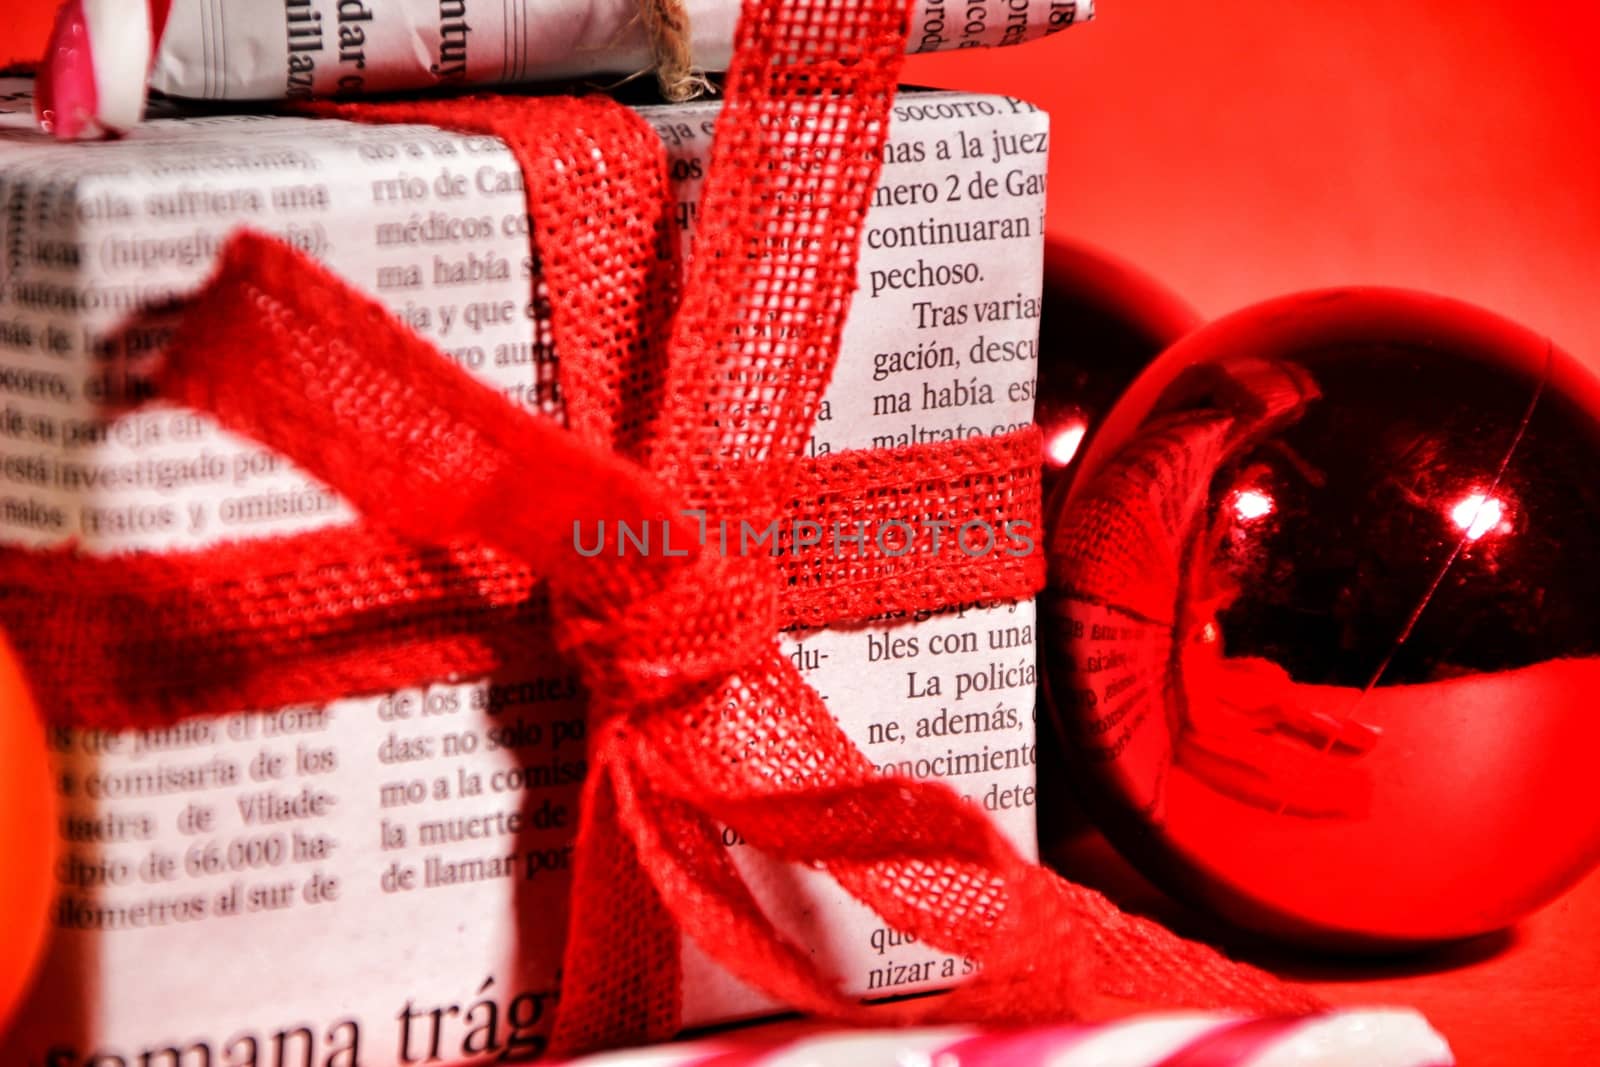 Gifts wrapped in old newspaper on red background by soniabonet